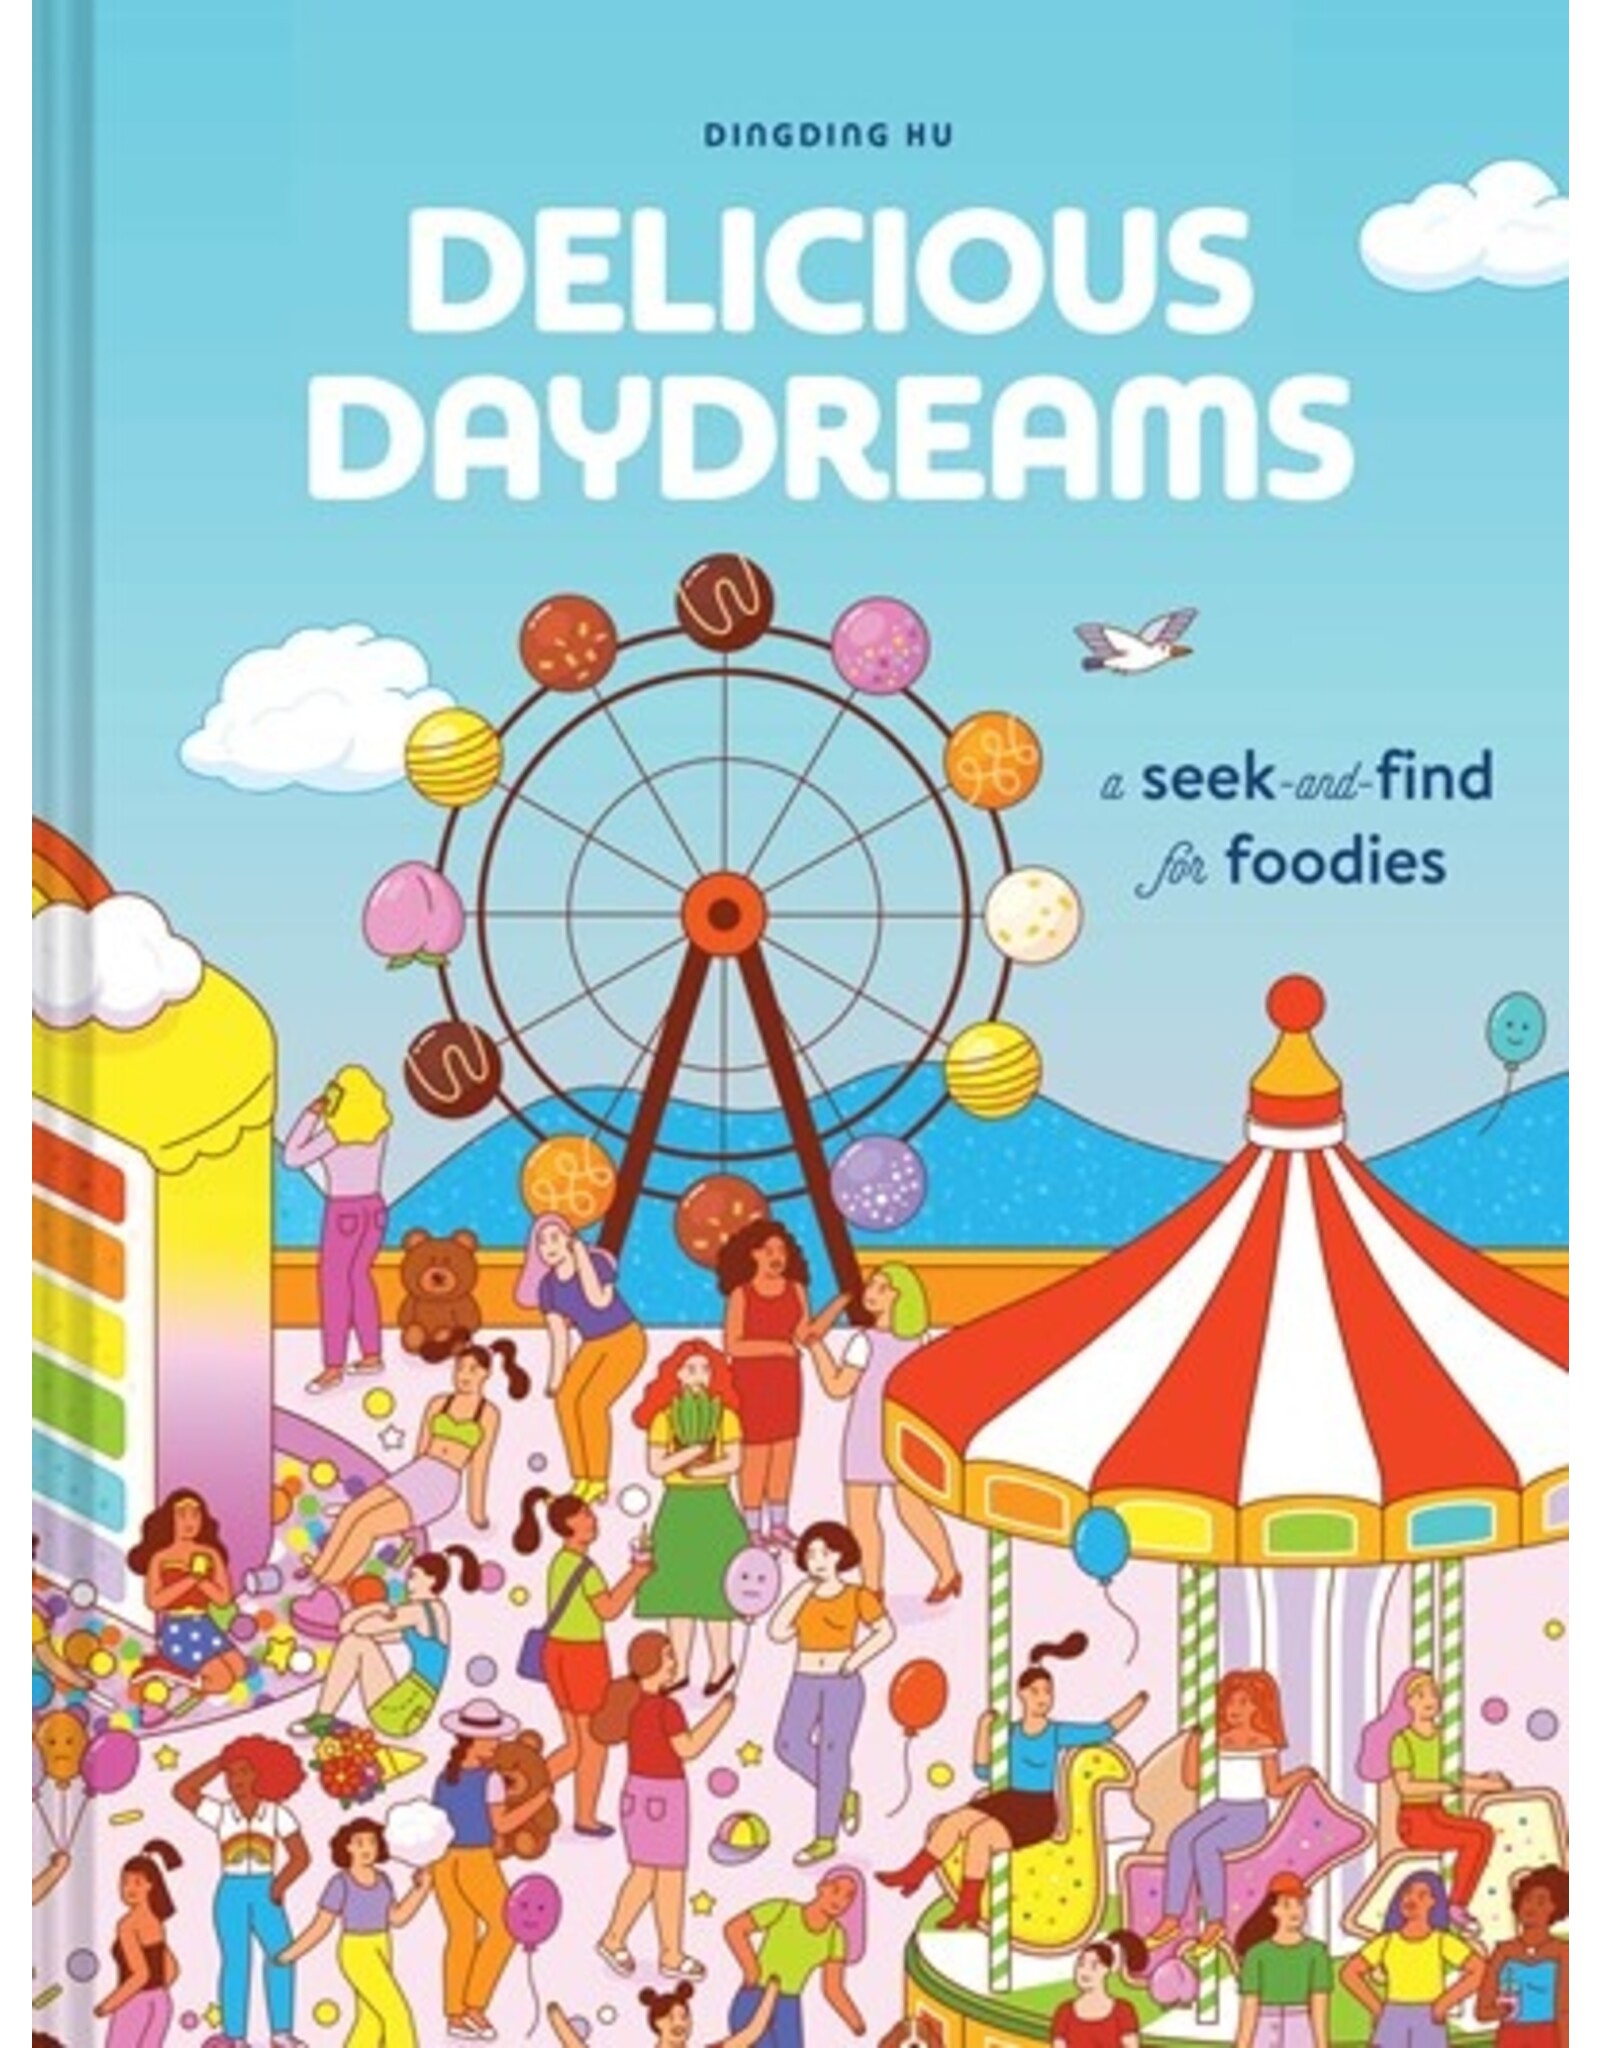 Books Delicious DayDreams  :  A Seek and Find for Foodies by Dingding Hu (Griot Book Club)